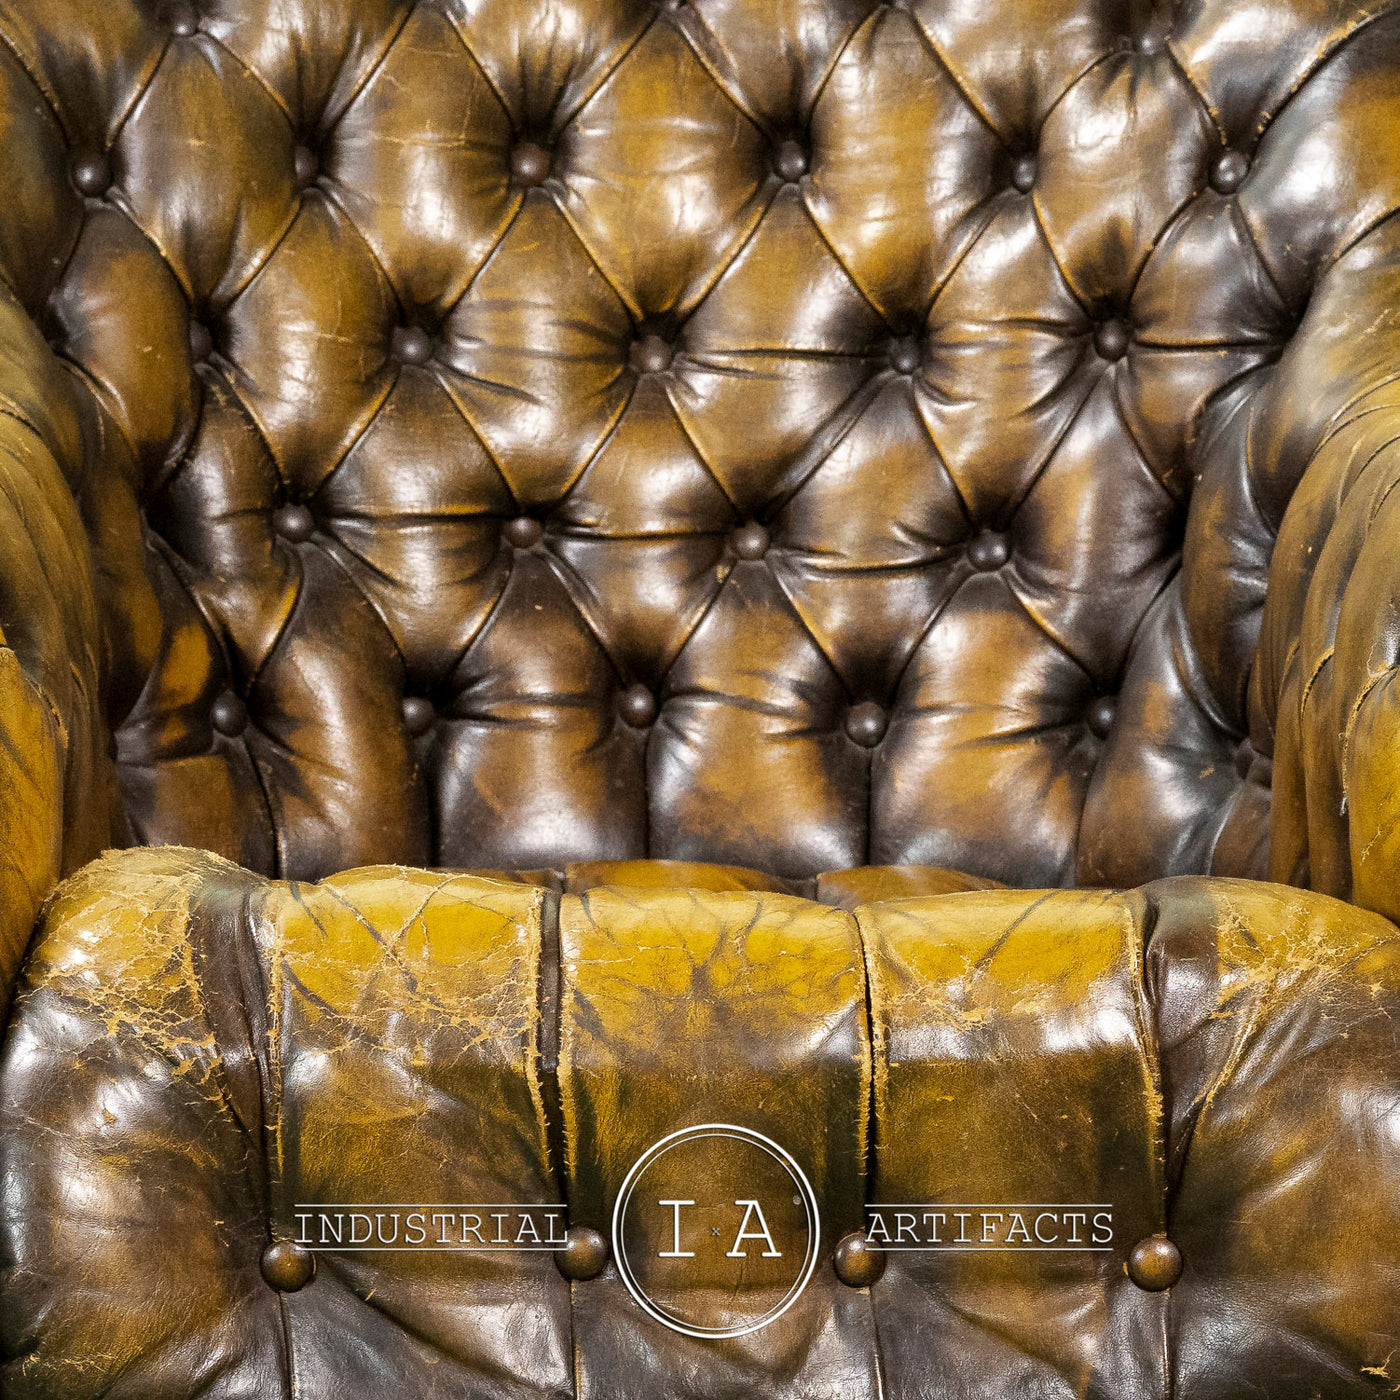 Antique Tufted Leather Armchair in Burnished Gold